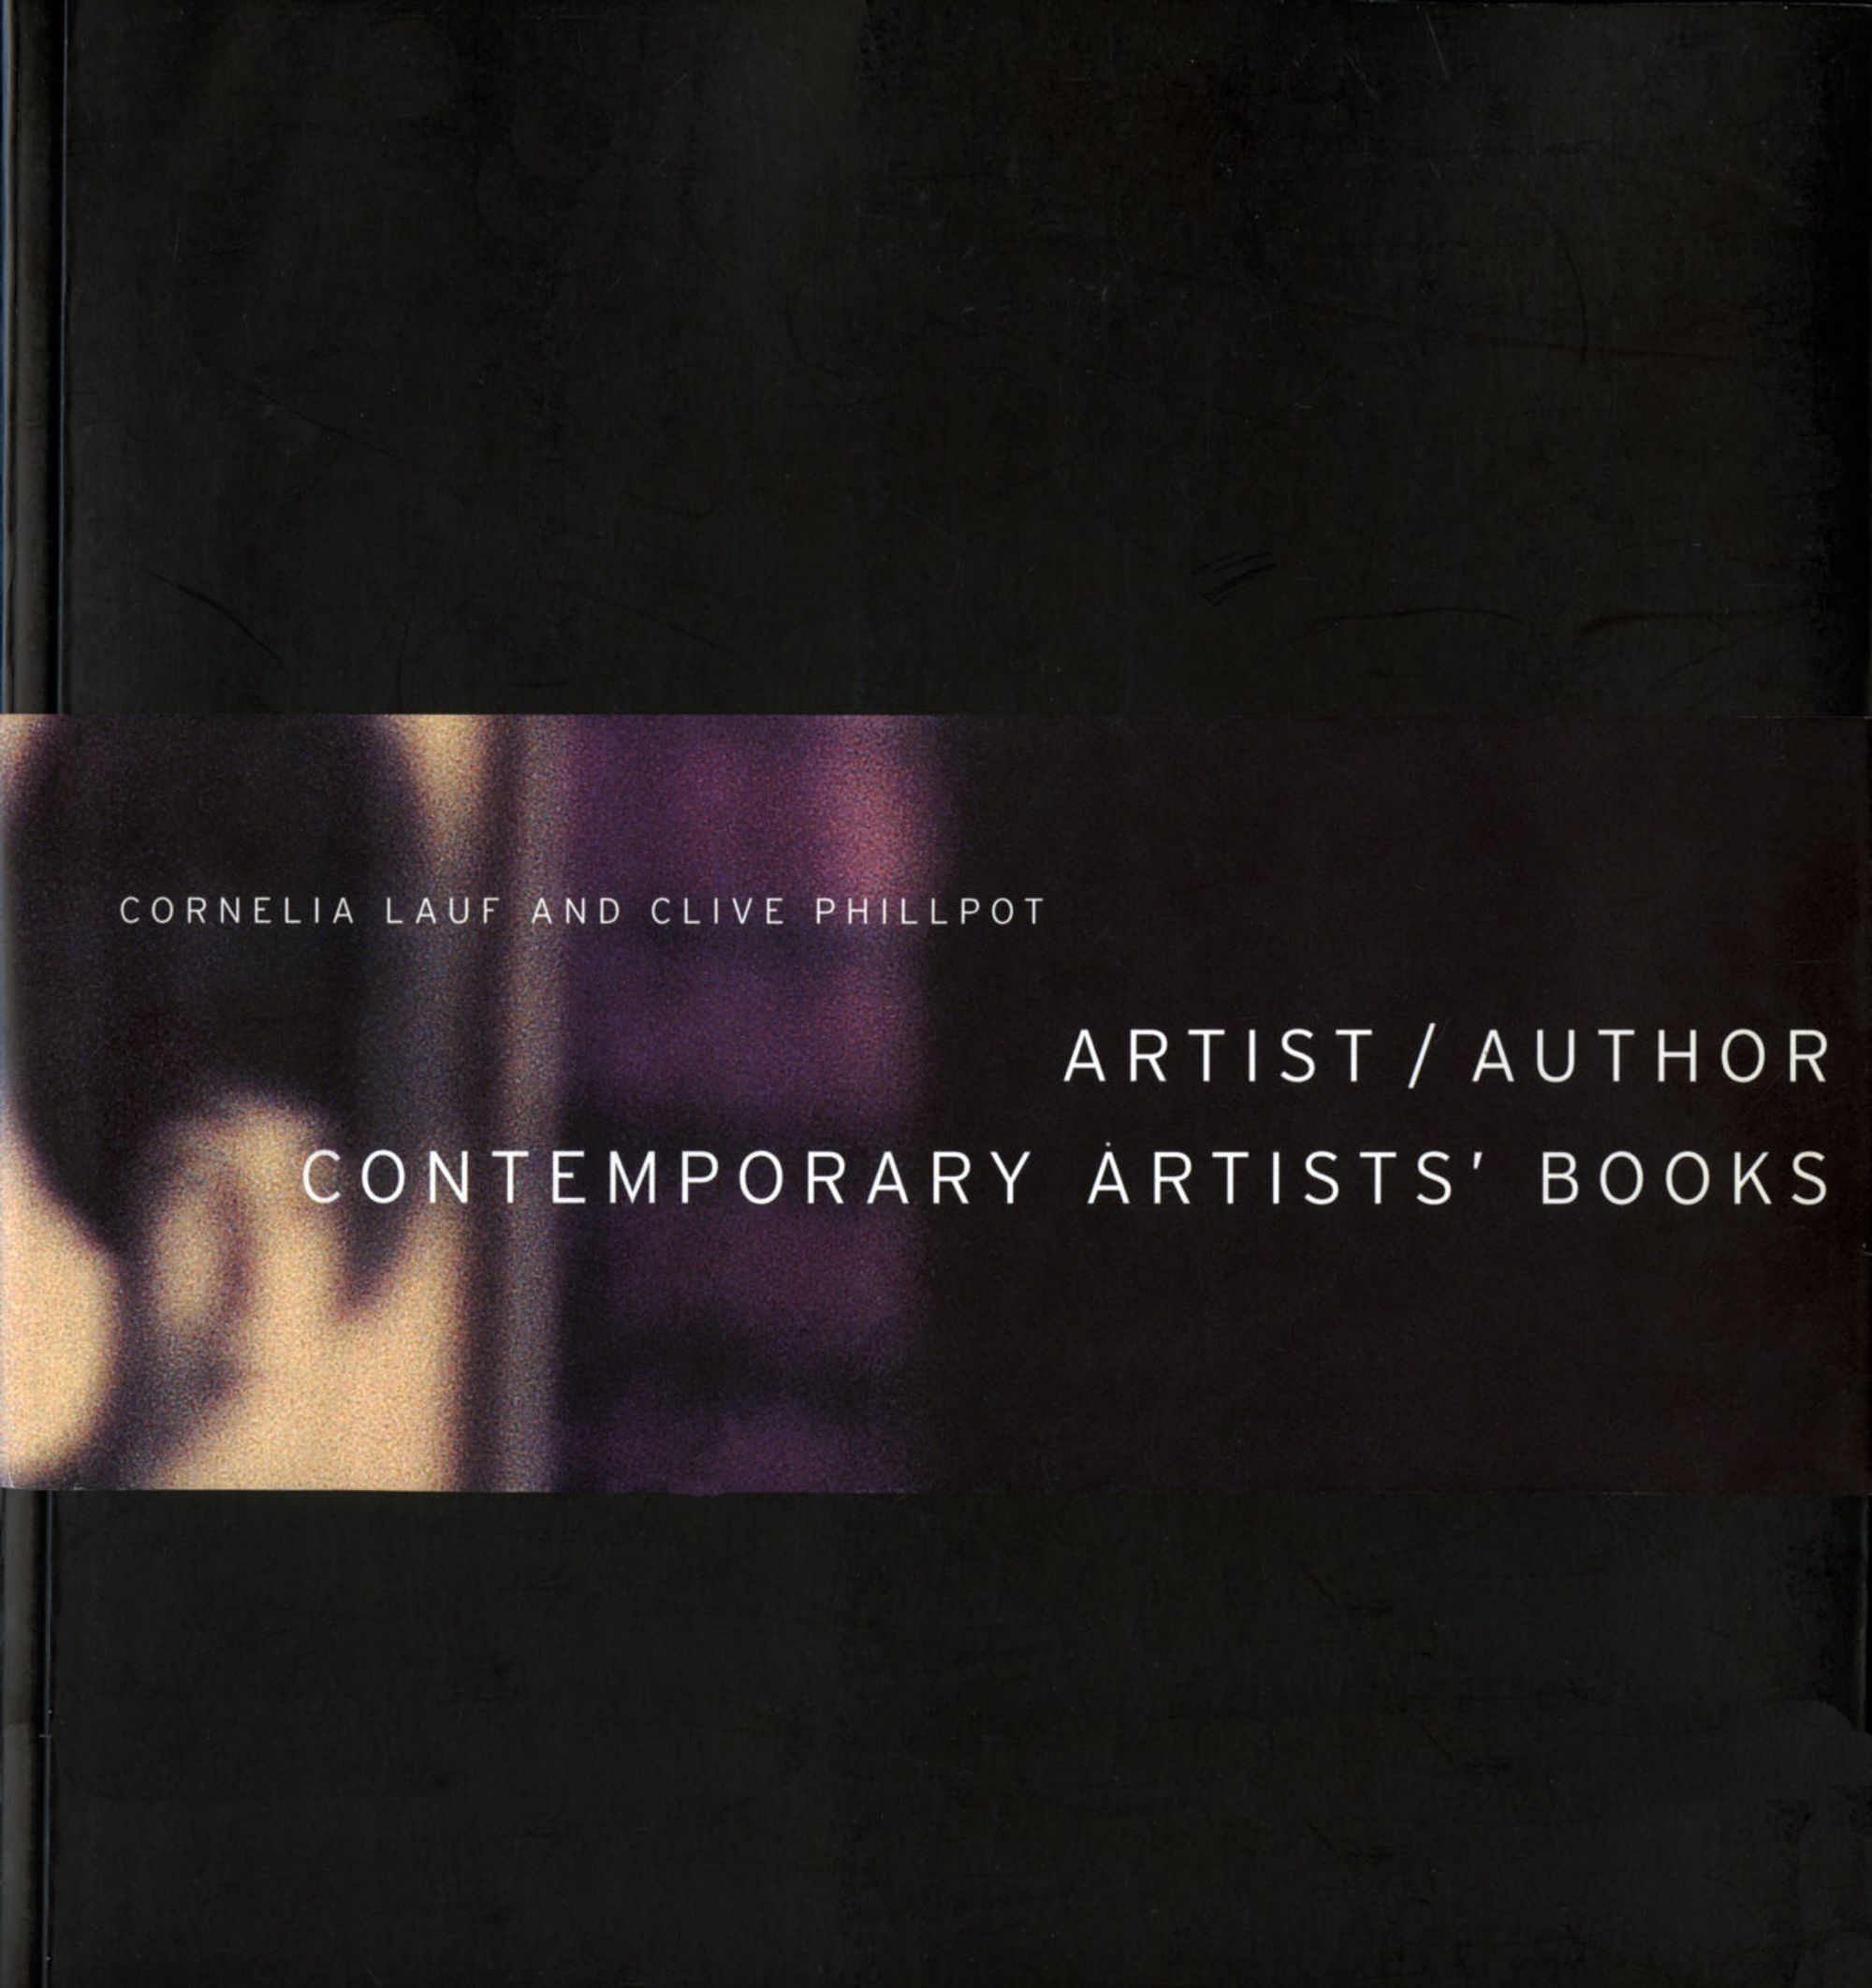 Detail view of Artist/Author: Contemporary Artists’ Books against a plain gray background